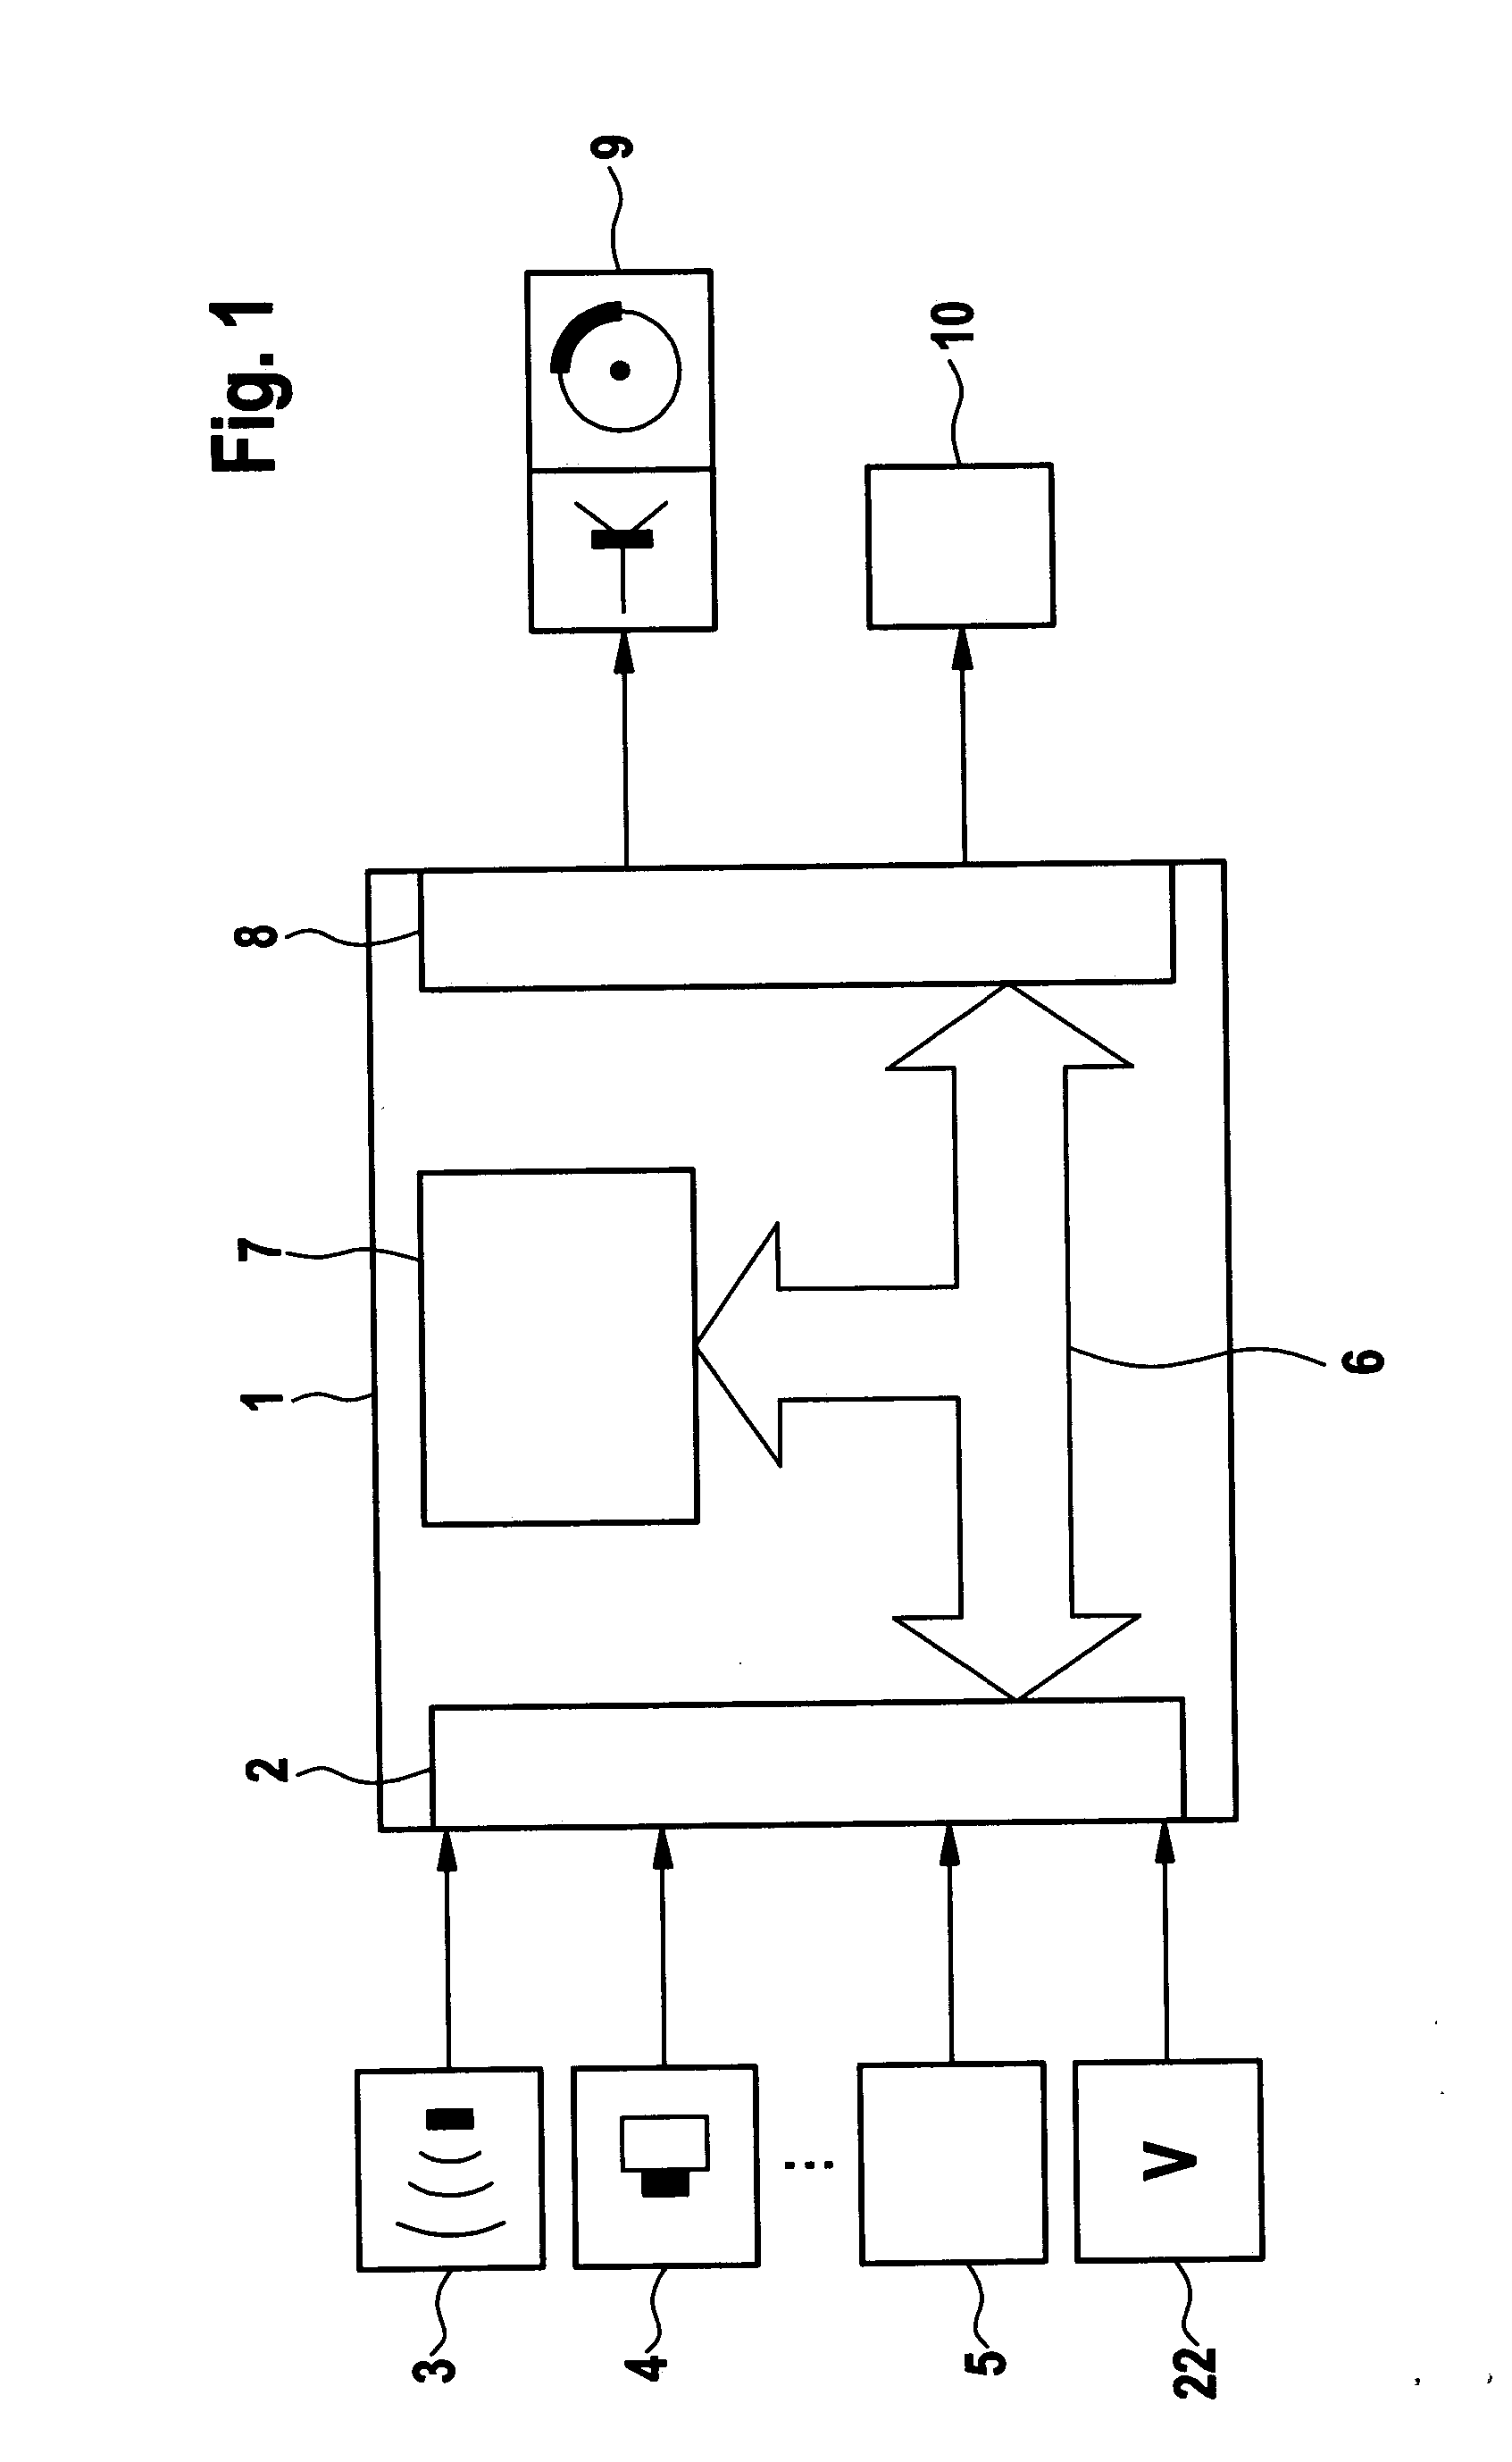 Method and device for triggering emergency braking